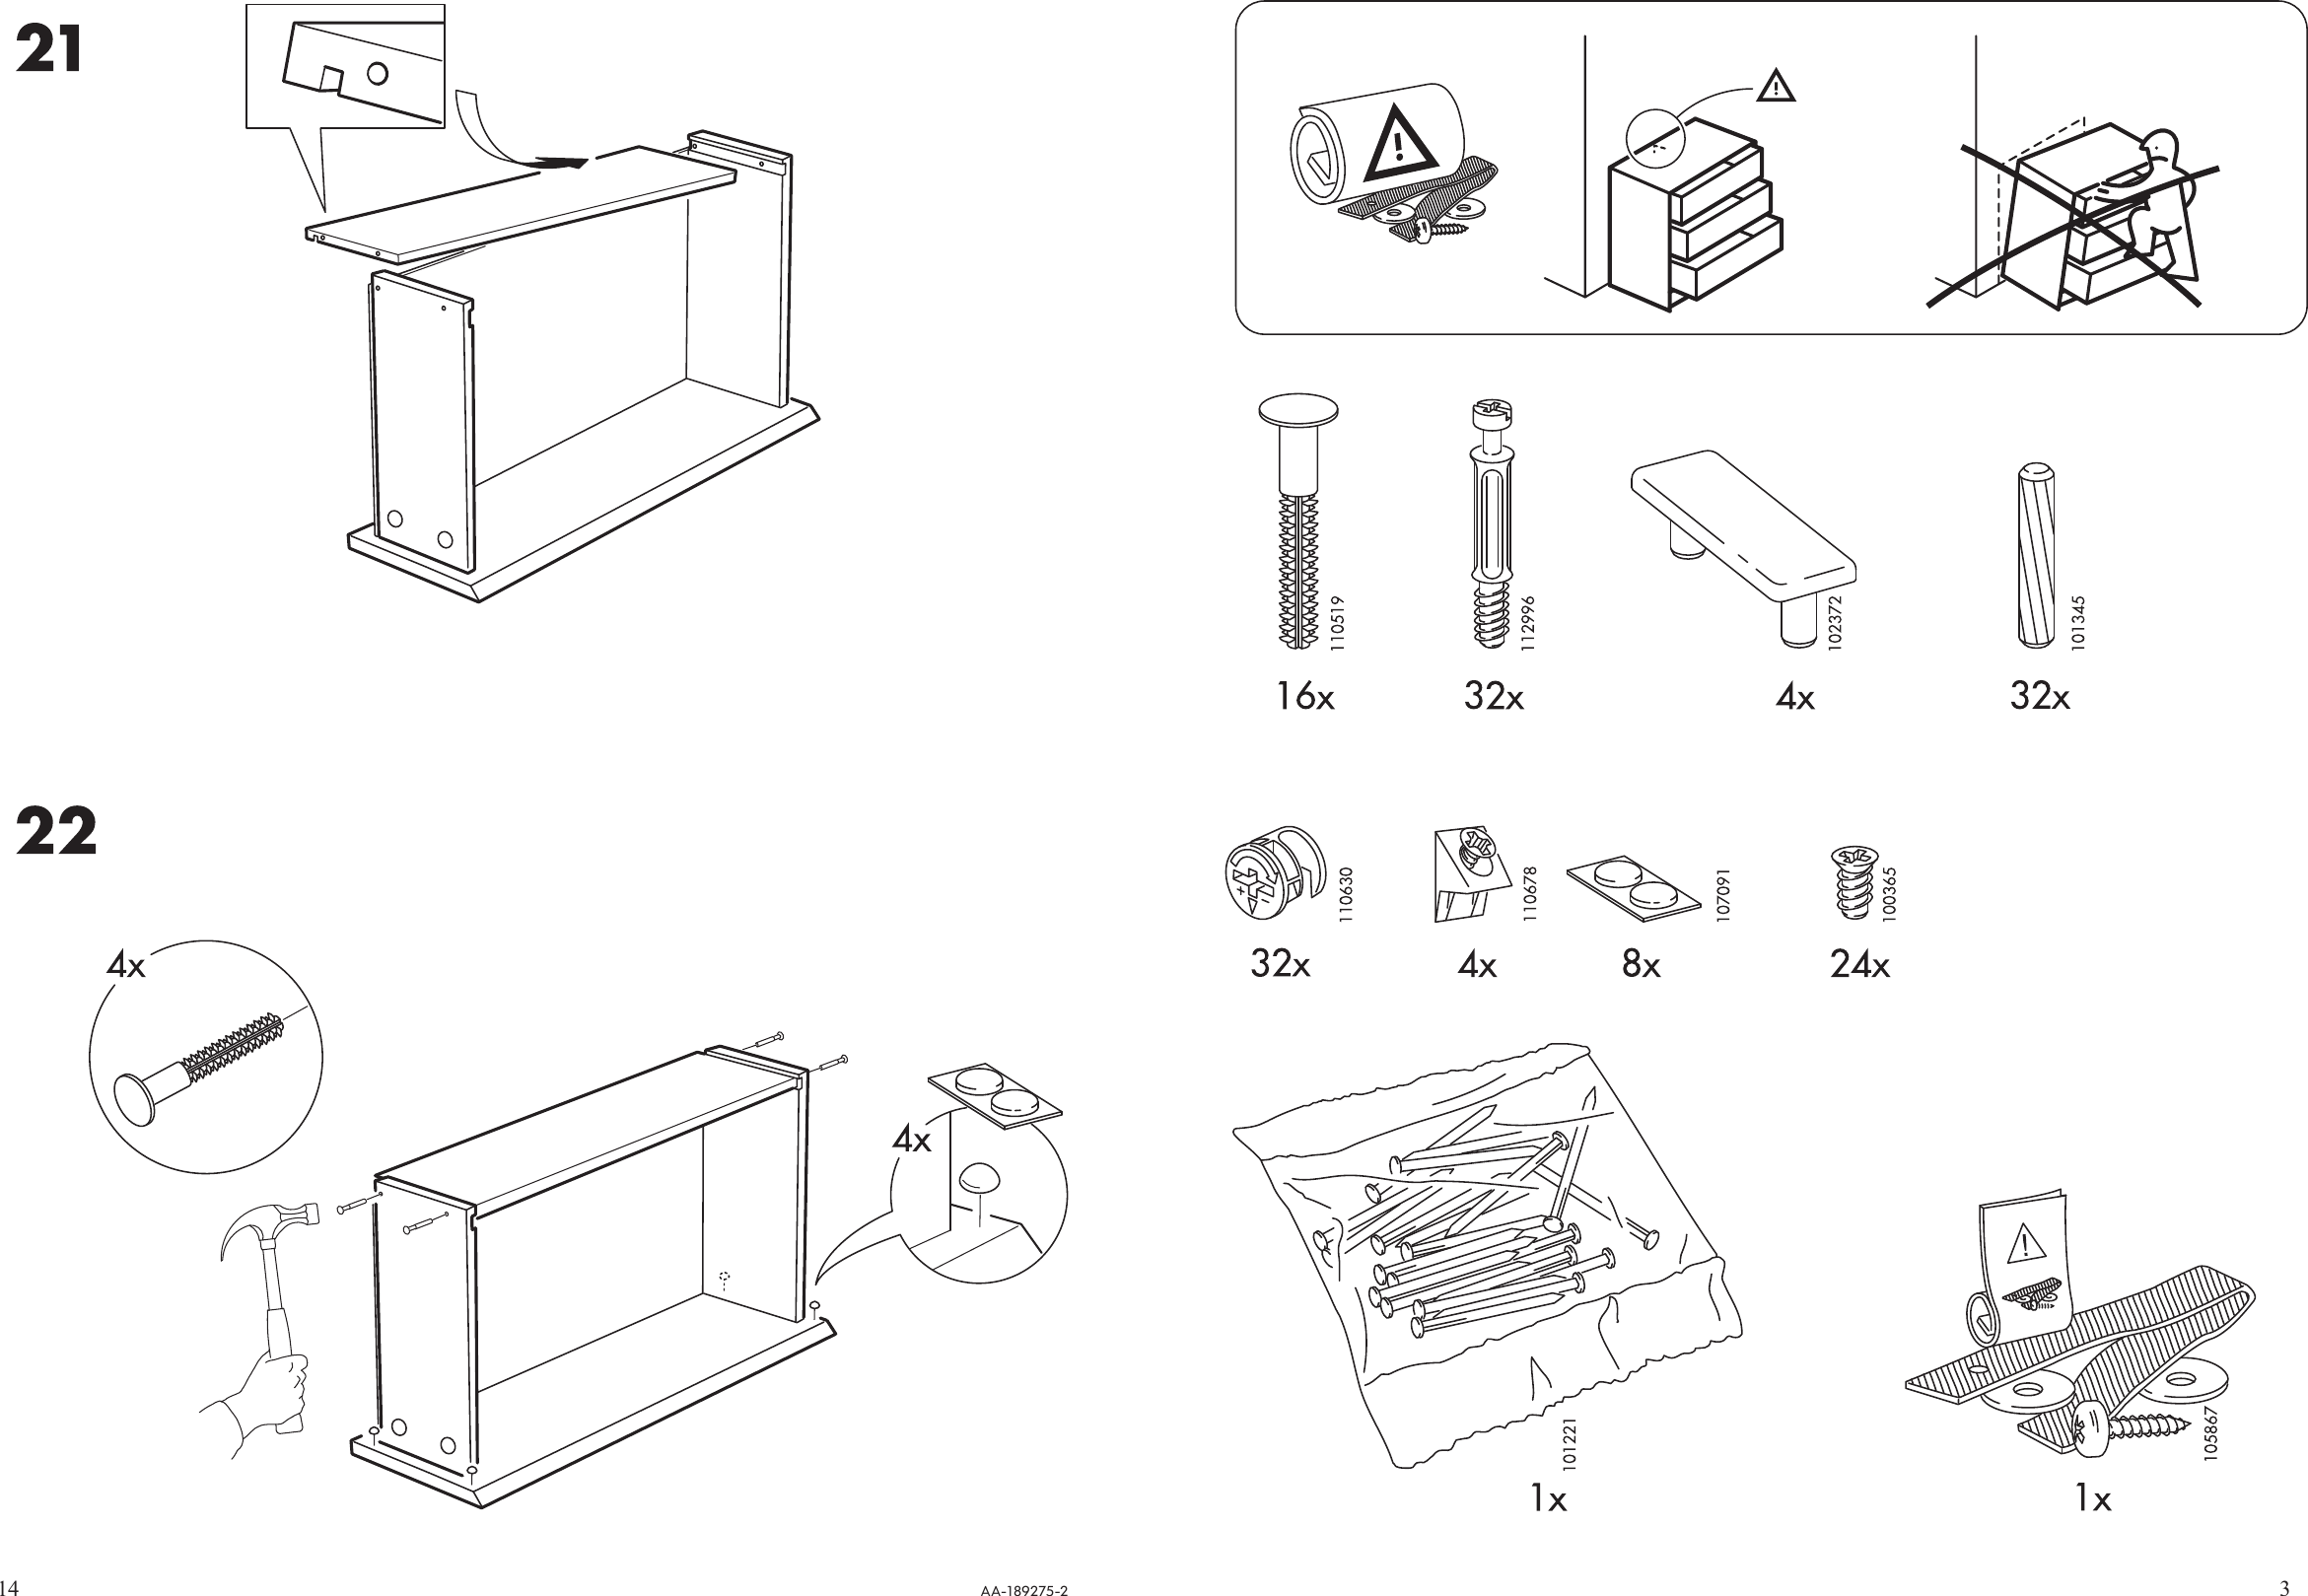 Page 3 of 8 - Ikea Ikea-Malm-Chest-W-4Drawers-32X40-Assembly-Instruction